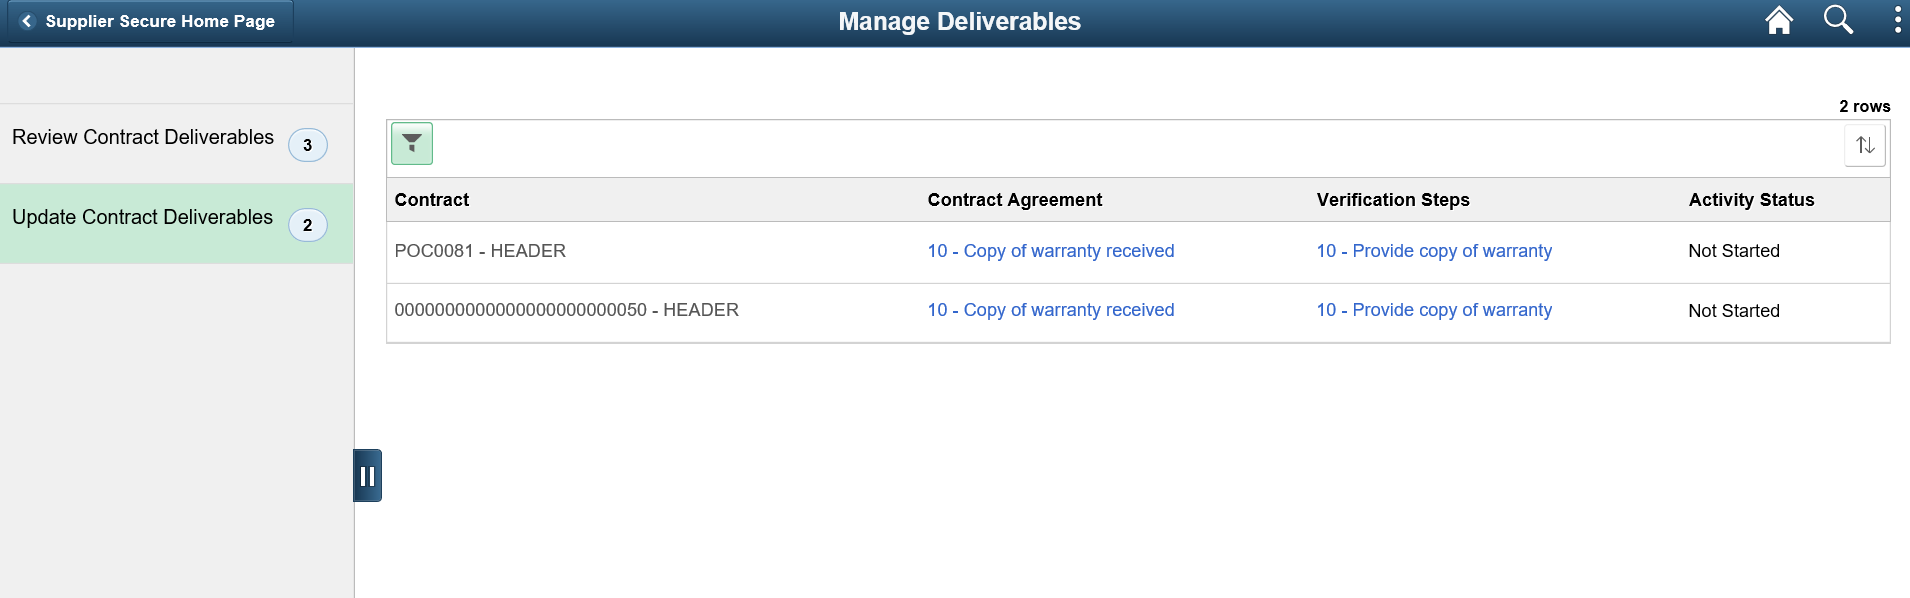 Manage Deliverables Update Contract Deliverables page